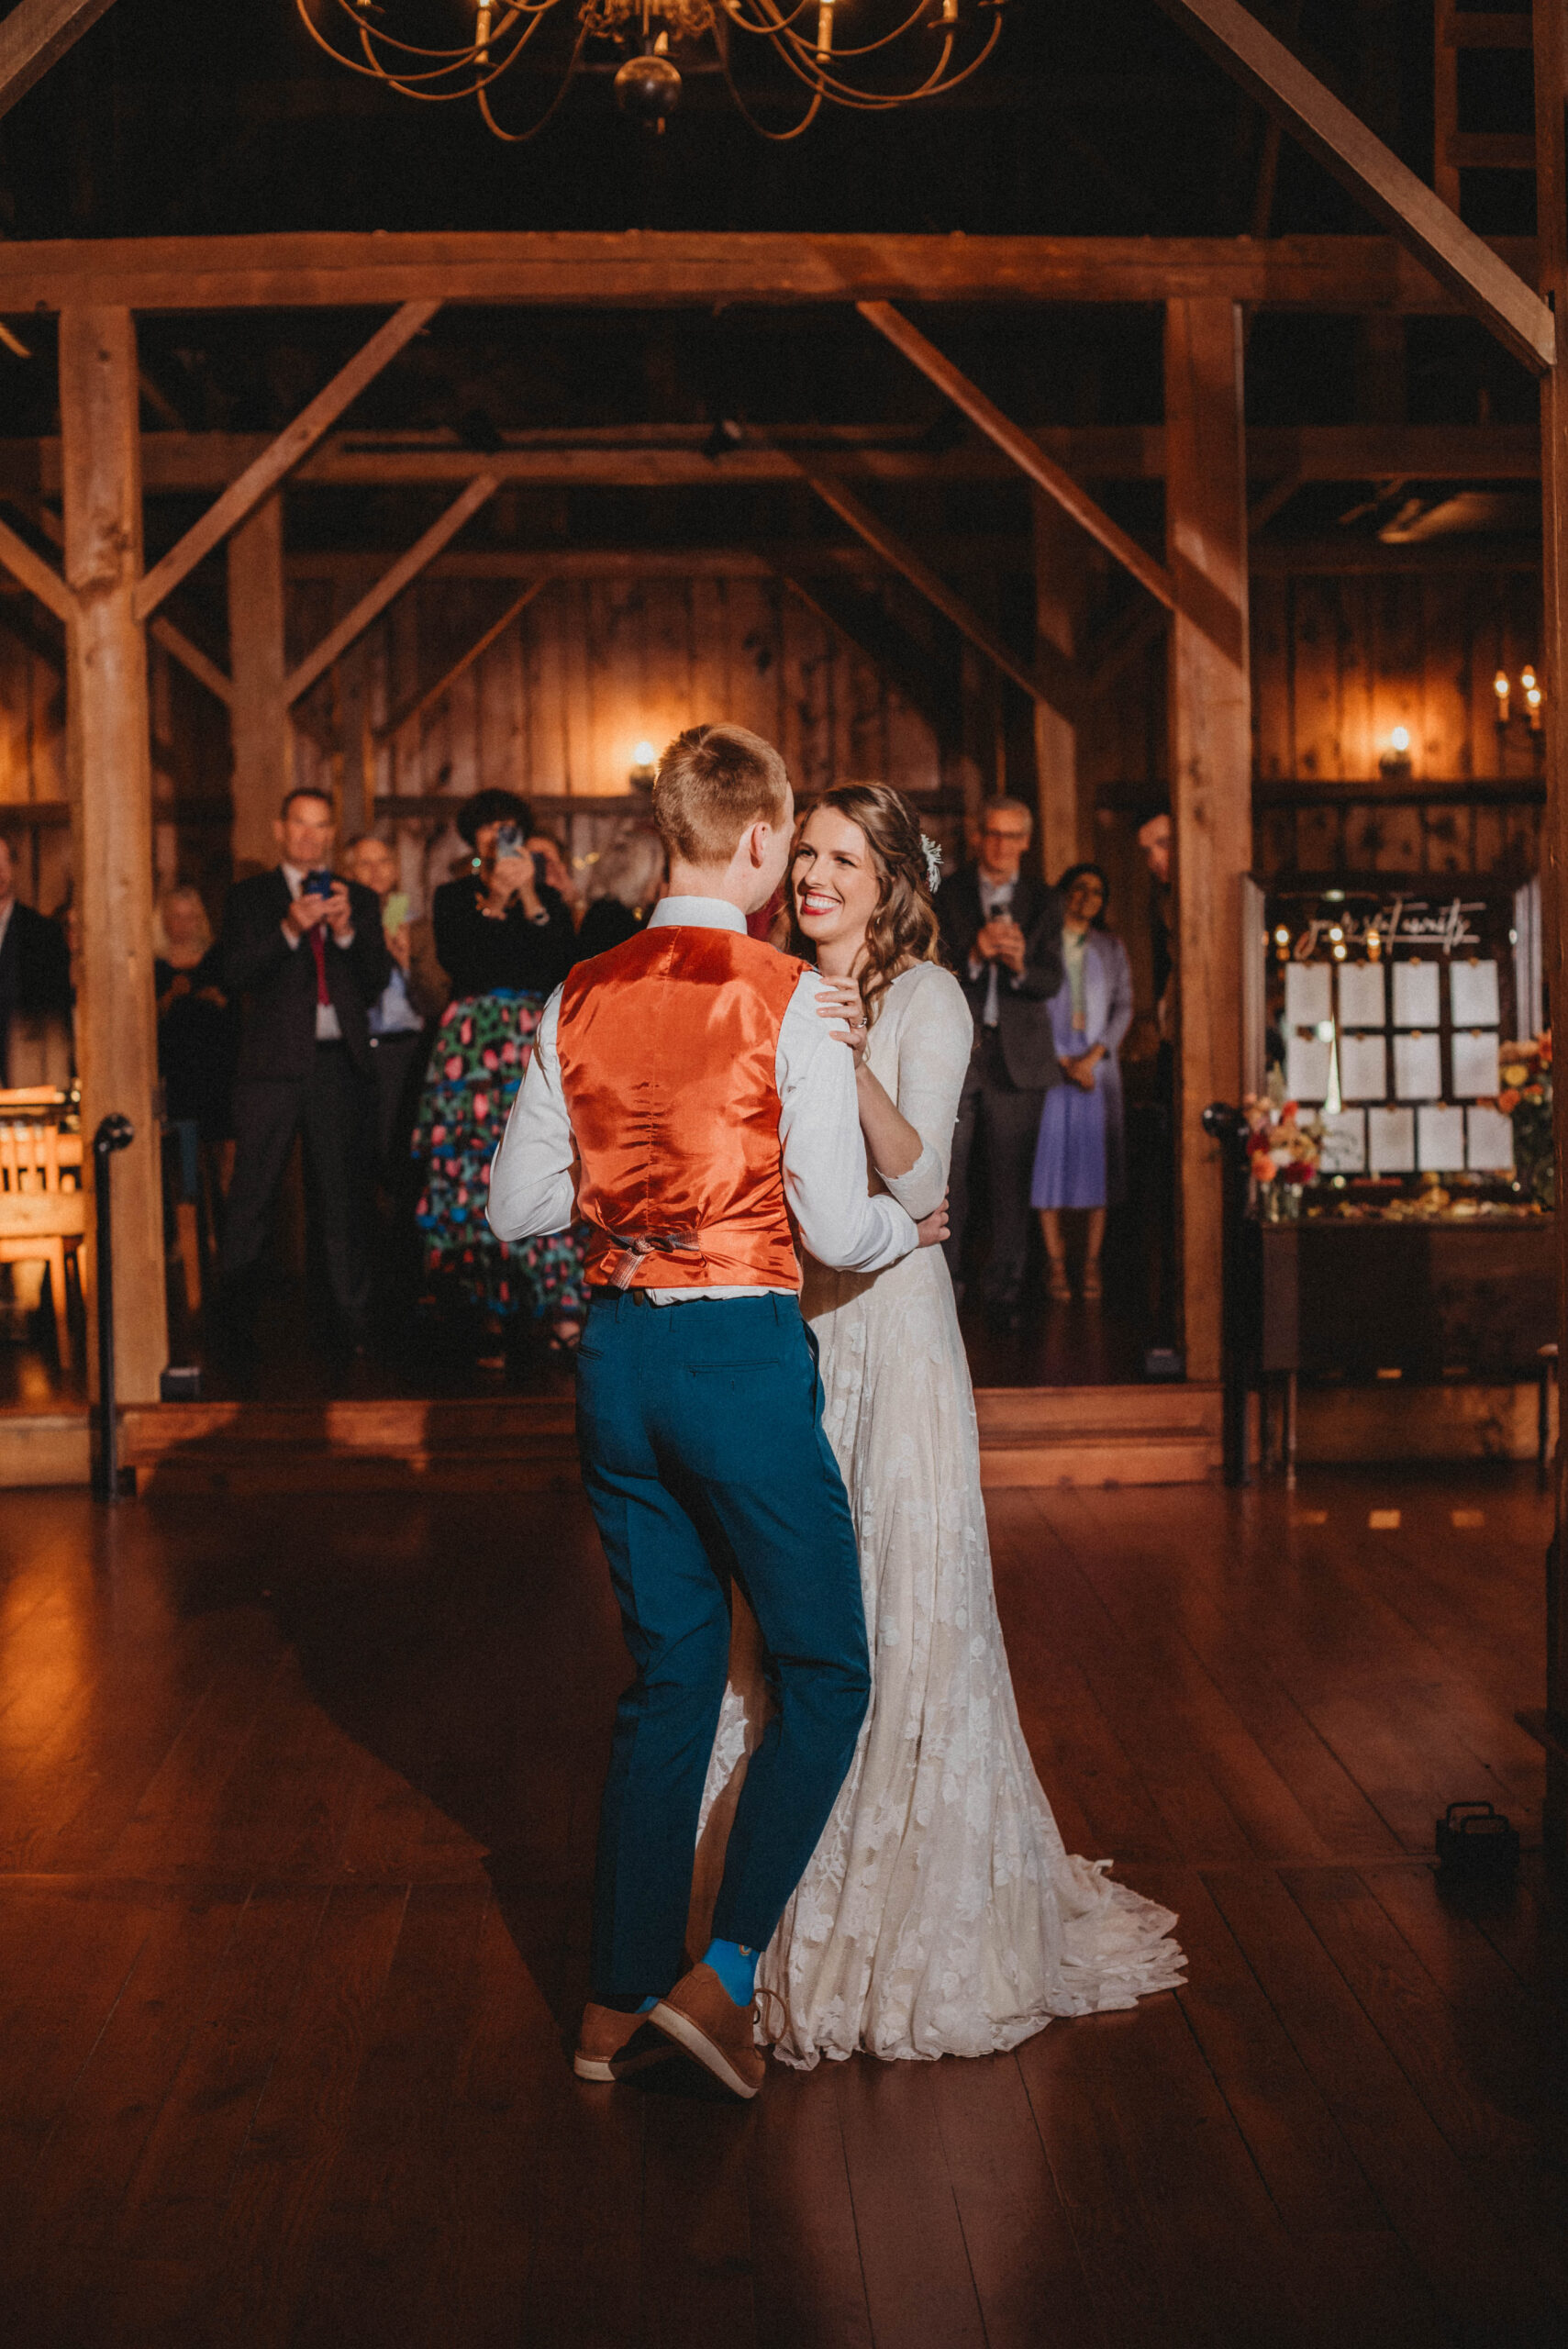 Emily and Sean sharing their first dance together inside the rustic barn venue